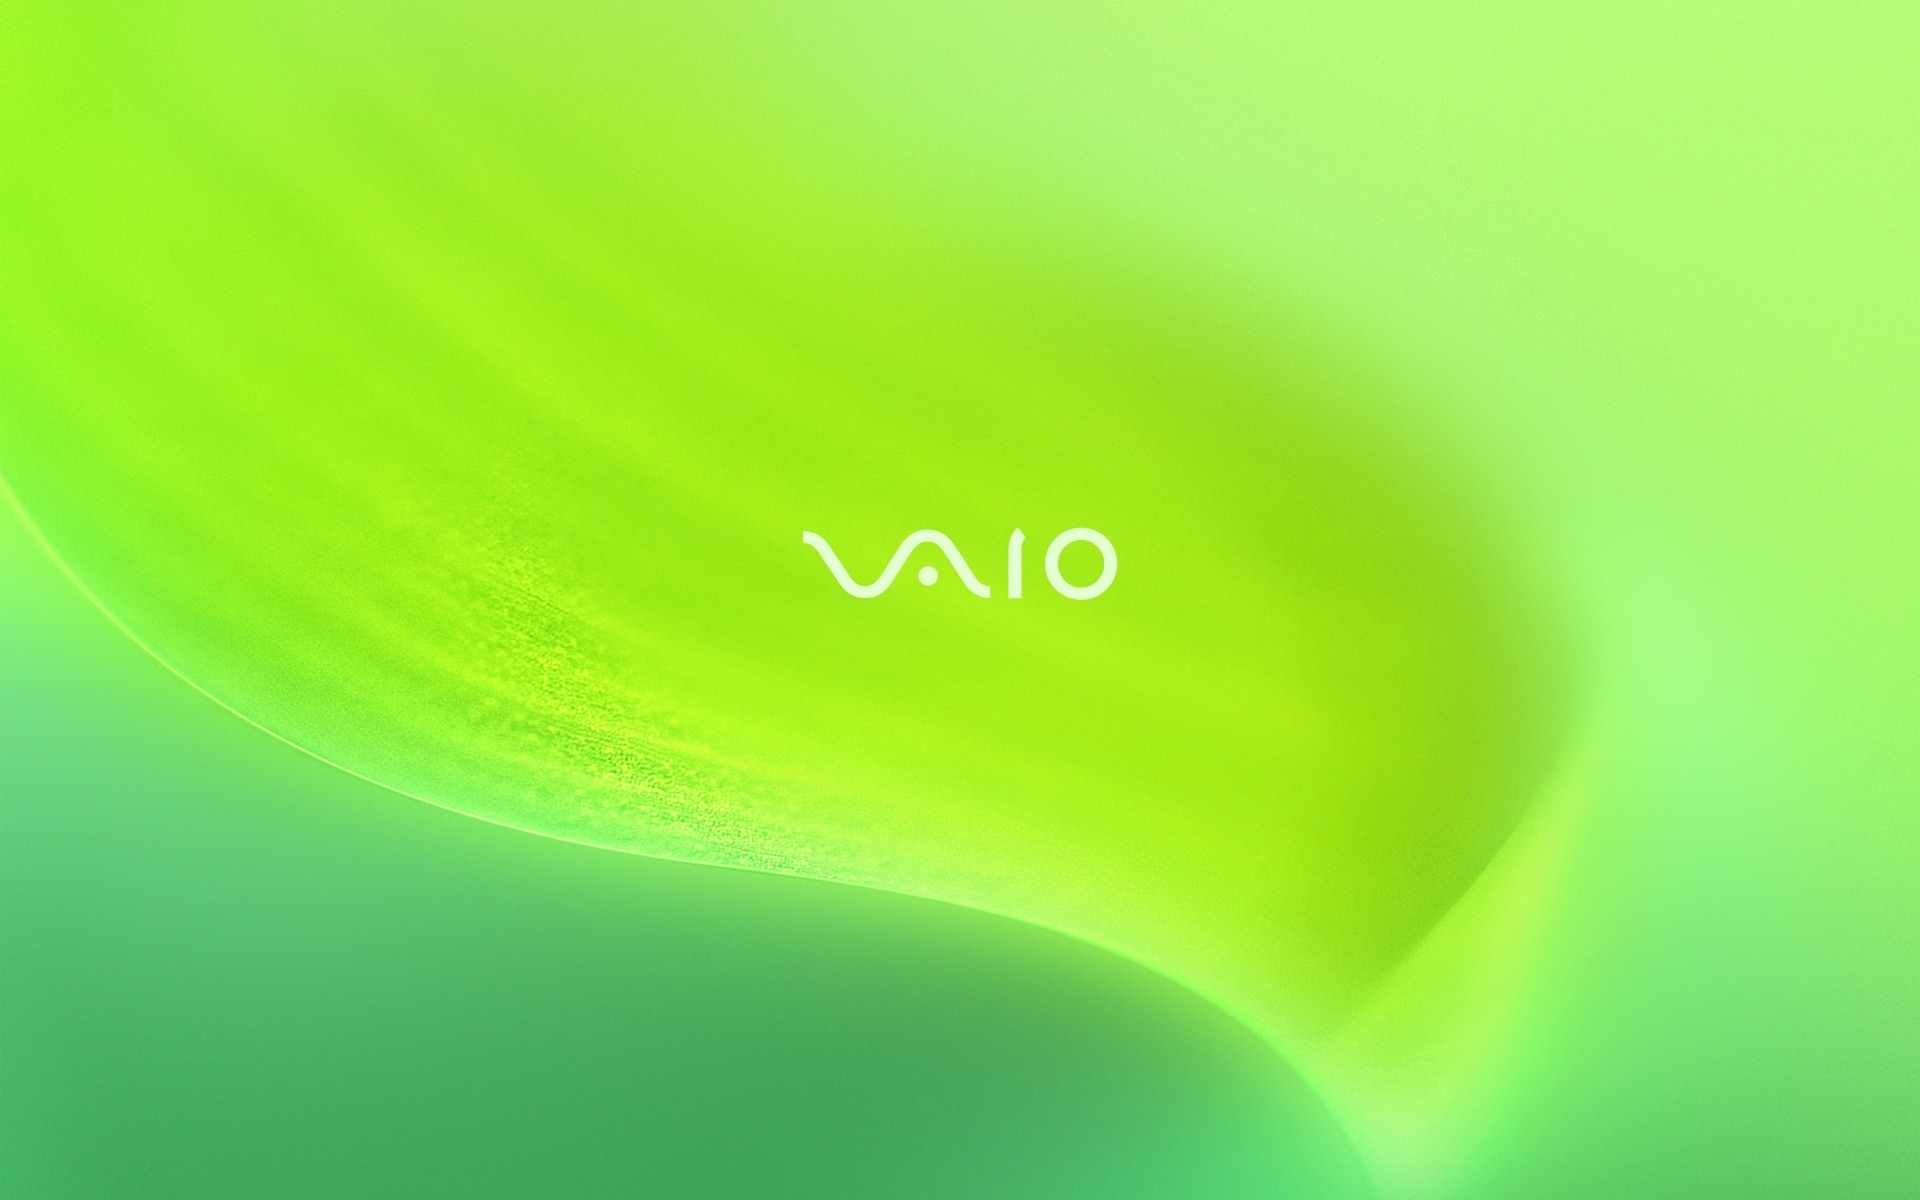 Vaio Green Leaf for 1920 x 1200 widescreen resolution